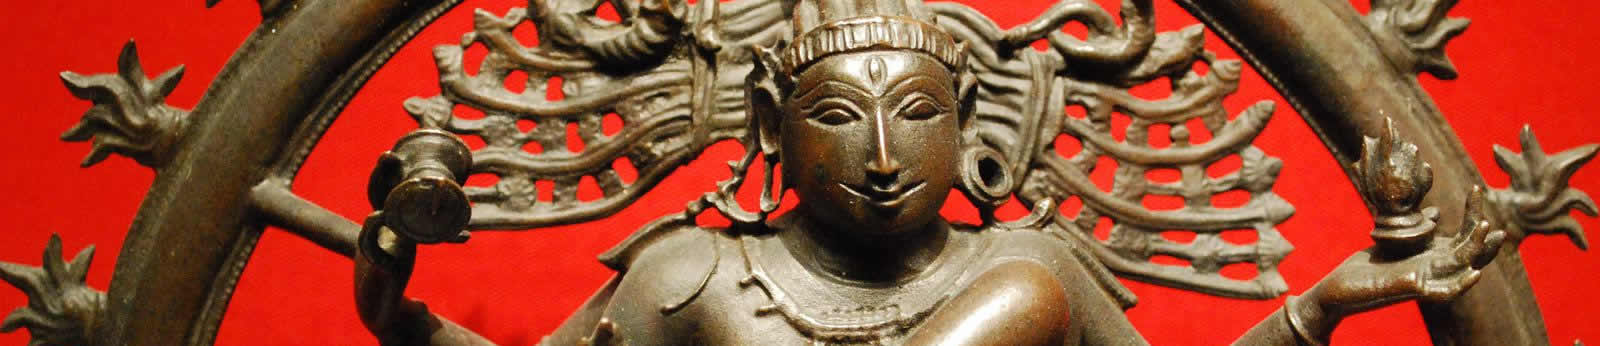 Detail of a statue in the Ashmolean Museum.  (Image credit: Richard Watts).